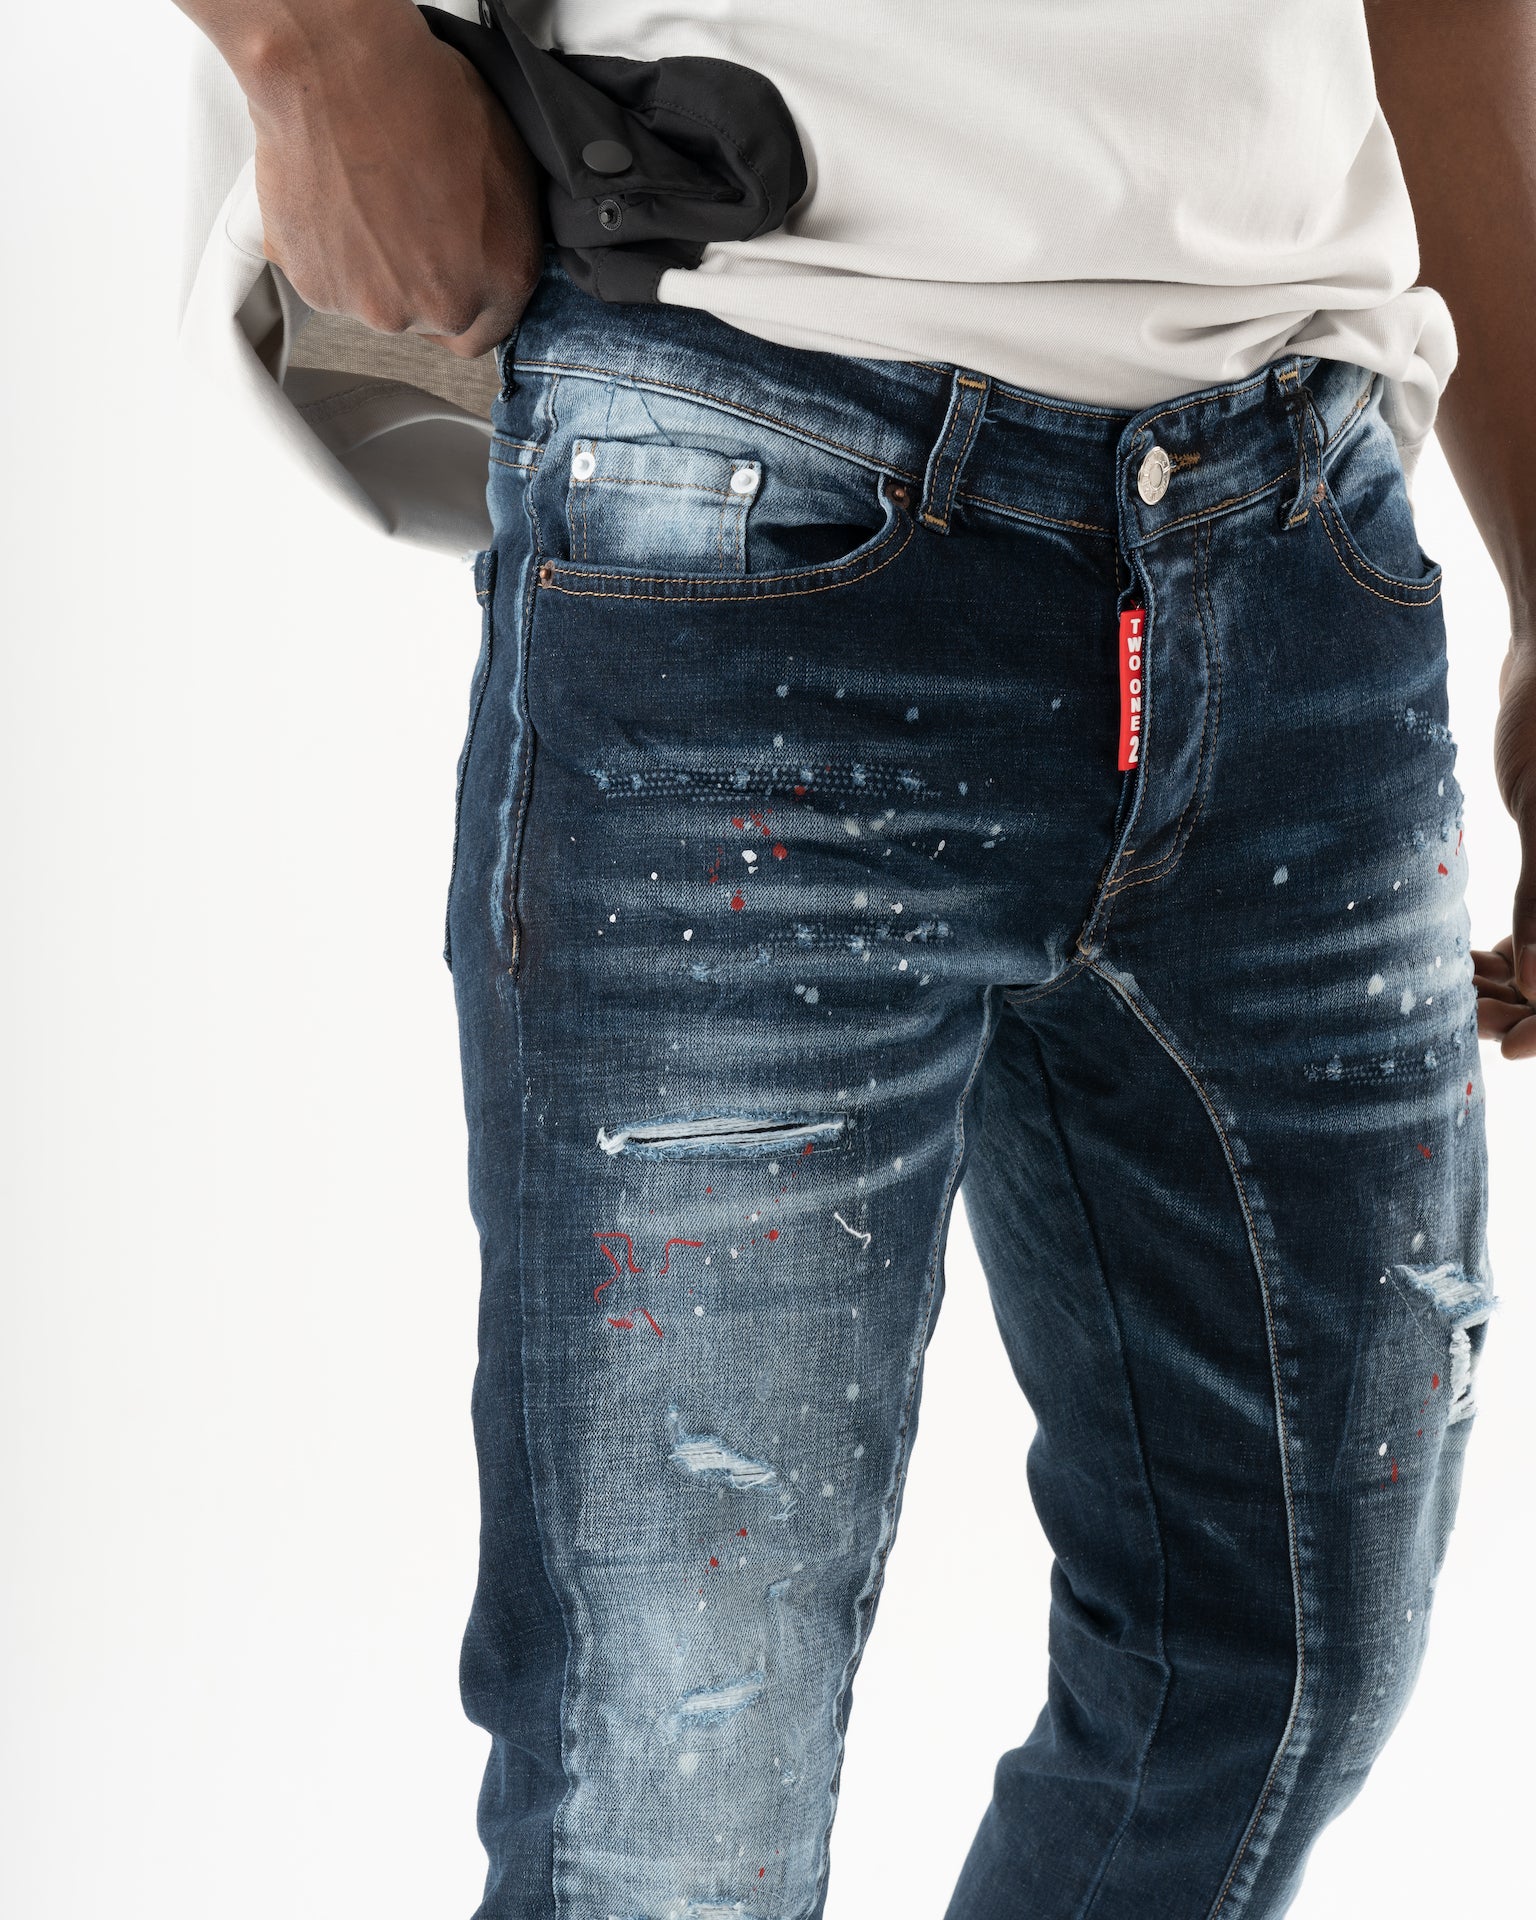 A man wearing a pair of STARLIGHT jeans with paint splatters on them.